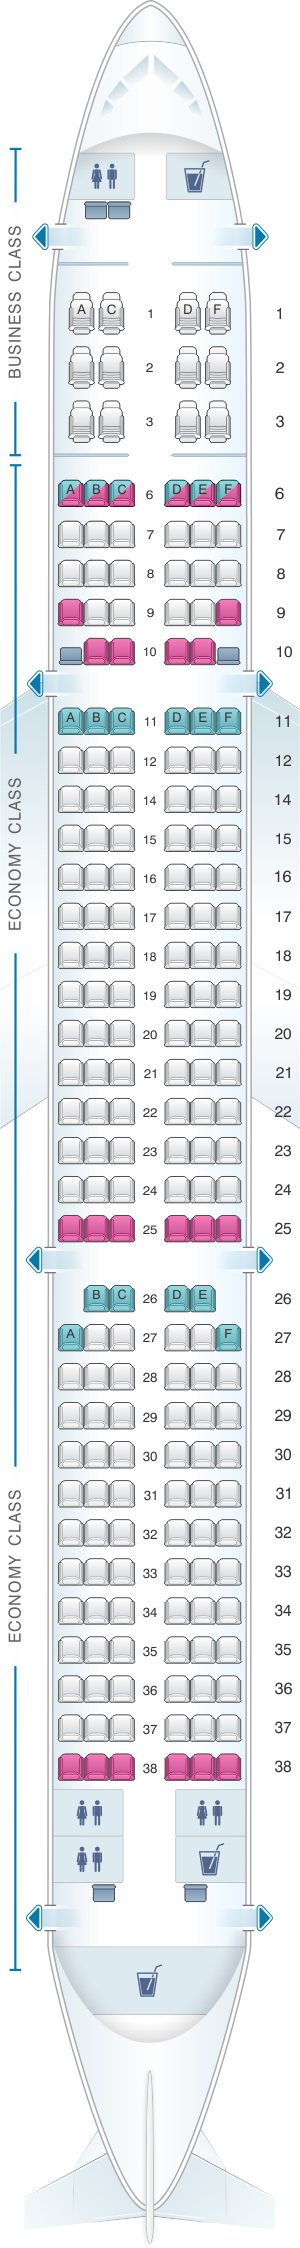 Seat map for SriLankan Airlines Airbus A321 231 Config. 1